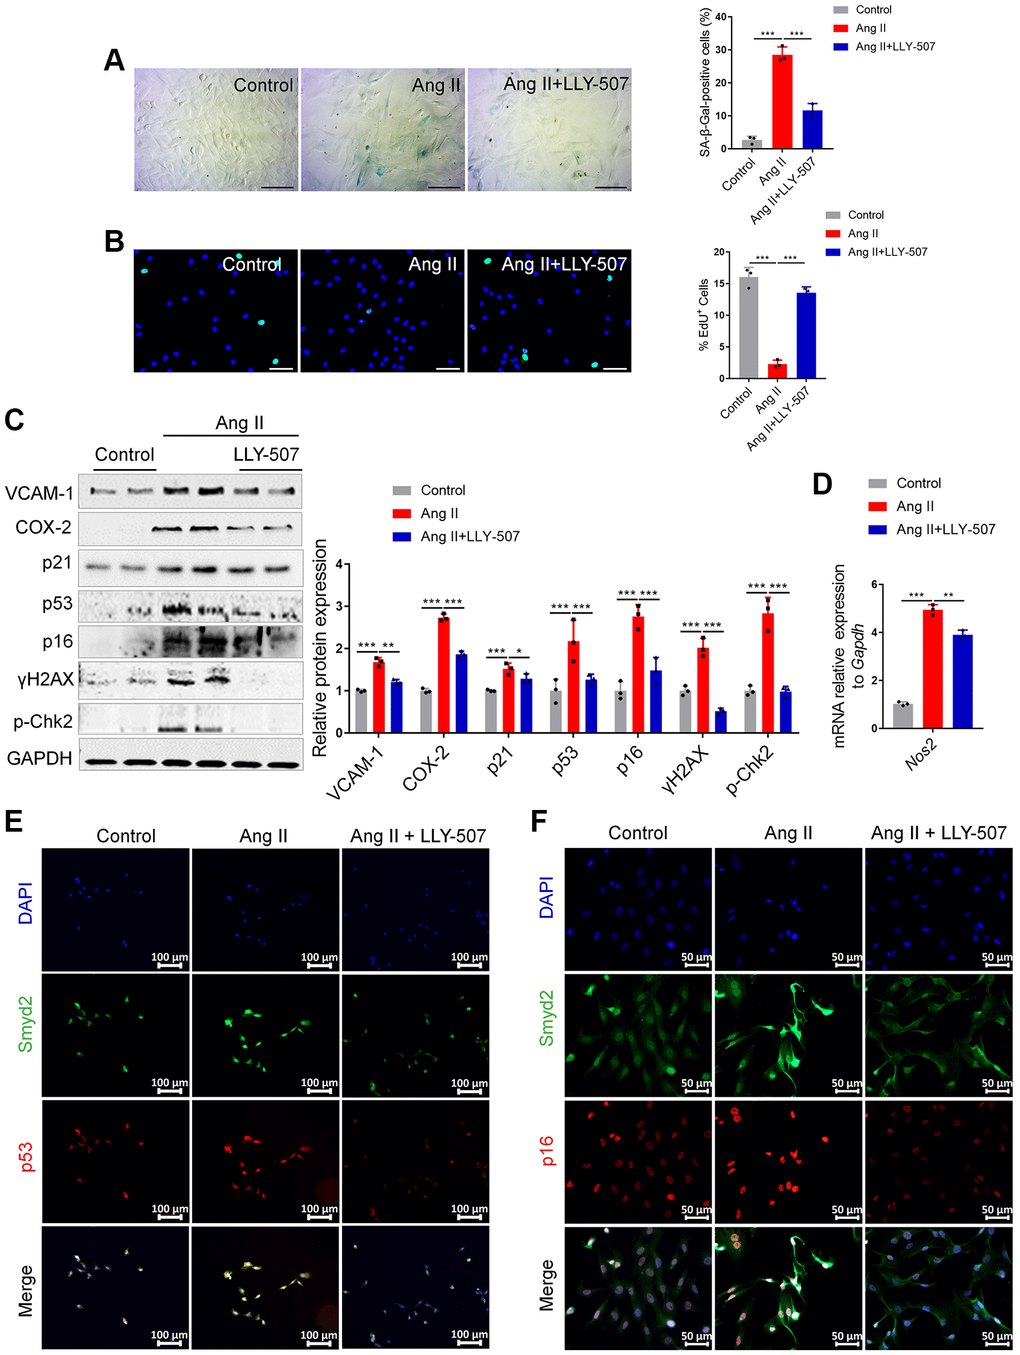 Inhibition of Smyd2 alleviates Ang II-induced senescence associated phenotypes in vitro. (A, B) SA-β-gal staining (A) and EdU incorporation (B) assays in Ang II-induced RAECs with LLY-507 (3 μM) pretreatment. Representative staining images are shown in the figure left, and the statistical analysis of positive cells is shown in the figure right. Scale bars, 100 μm. (C) Expressions of senescence markers (p53, p21 and p16), pro-inflammatory molecules (VCAM-1 and COX-2) and DNA damage markers (p-Chk2 and γH2AX) were detected by western blot analysis upon LLY-507 pretreatment in Ang II-induced RAECs. Representative western blot images are shown on the left, and the statistical analysis of relative protein expressions is shown on the right. GAPDH was used as the loading control. (D) The mRNA levels of Nos2 (encoding the iNOS protein) in Ang II-induced RAECs with LLY-507 pretreatment was examined by RT-qPCR. (E, F) Immunofluorescence double staining of Smyd2 and the senescence markers (p53 and p16) upon LLY-507 pretreatment in Ang II-induced RAECs. Scale bars, 100 μm or 50 μm. Data are presented as the mean ± SEMs, *p **p ***p n = 3).